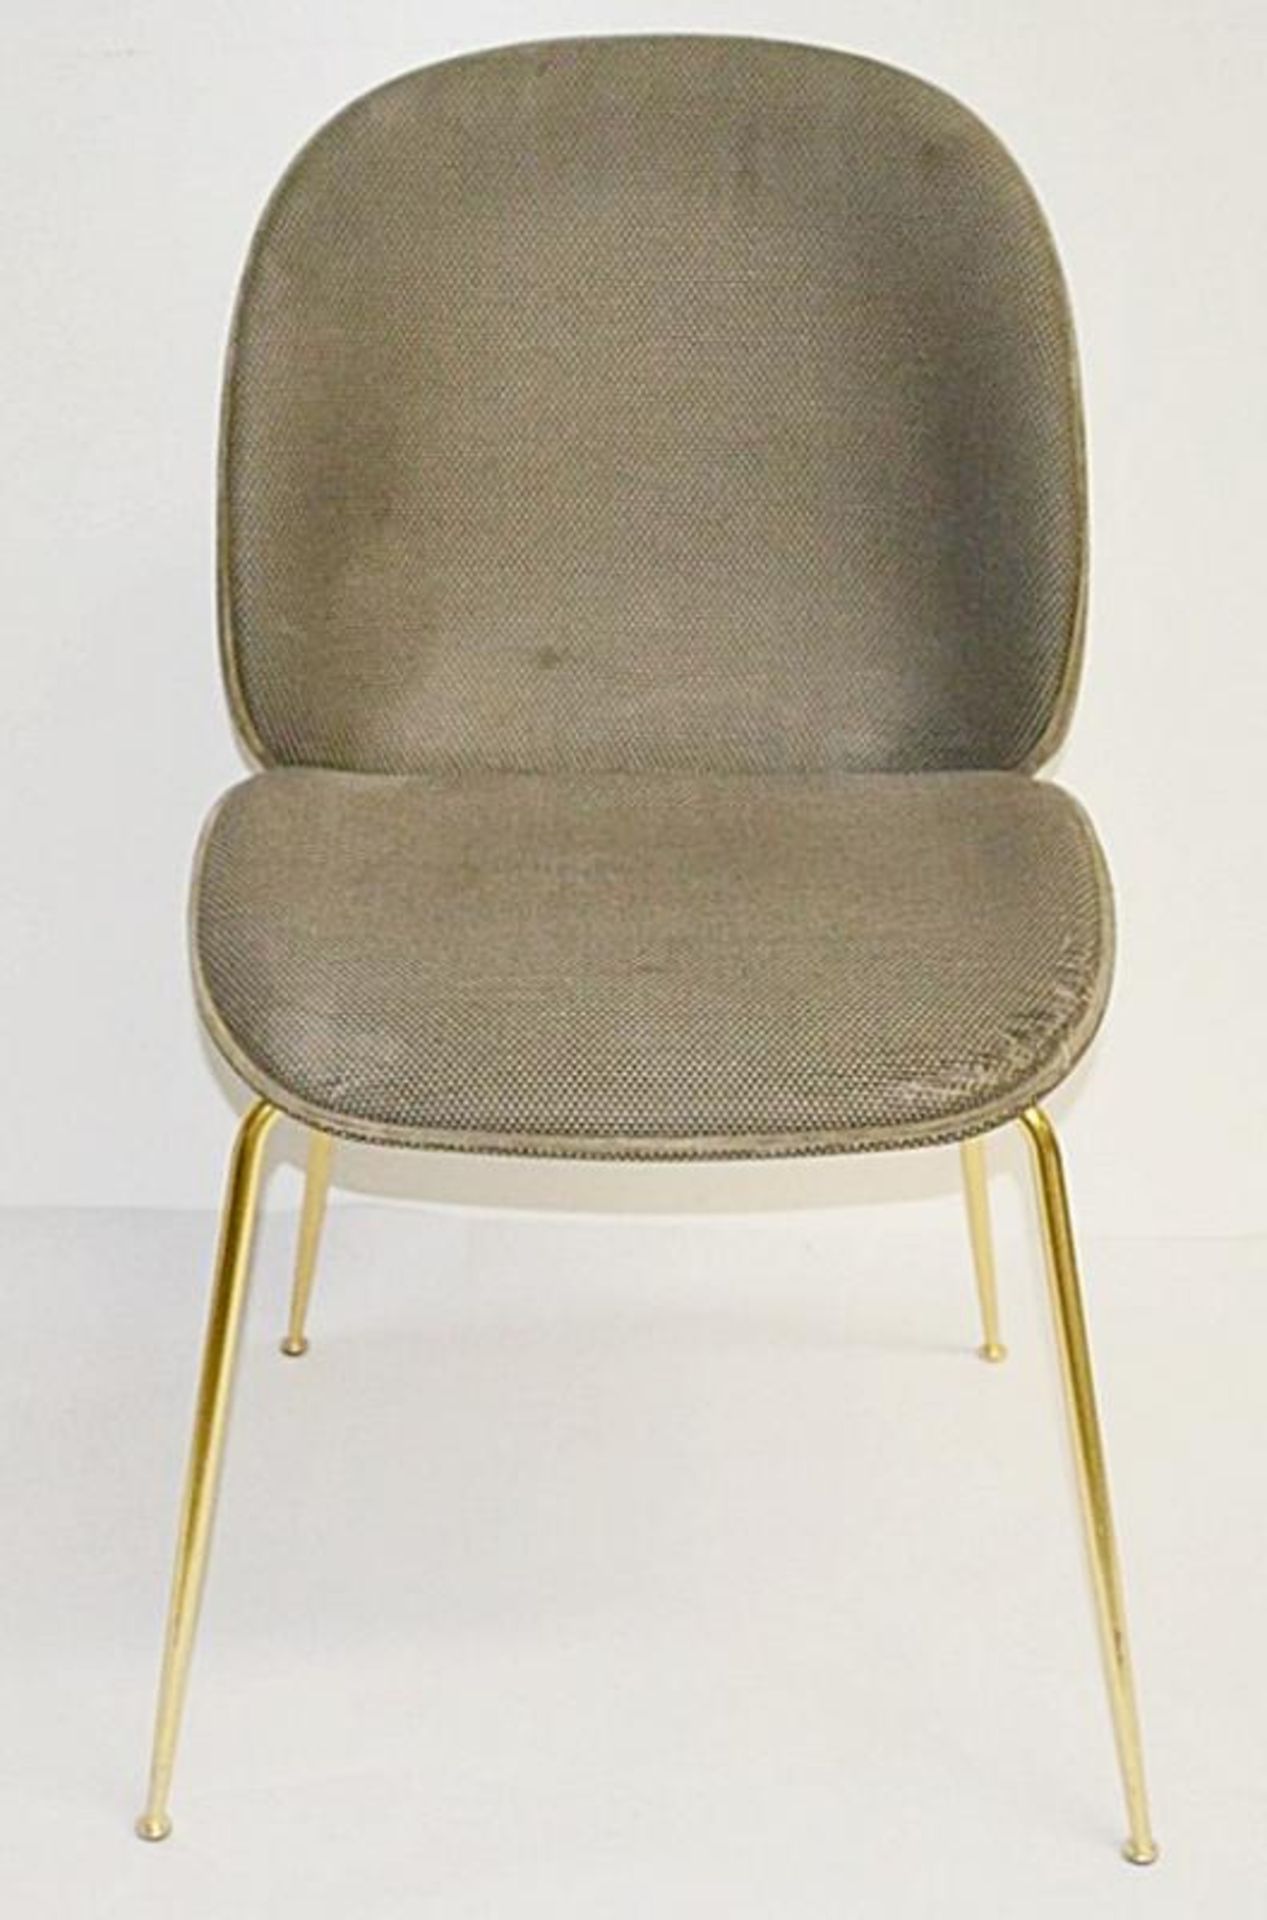 1 x GUBI 'Beetle Chair' - Designed By GamFratesi - Used, Please Read Condition Report - Dimensions: - Image 5 of 6